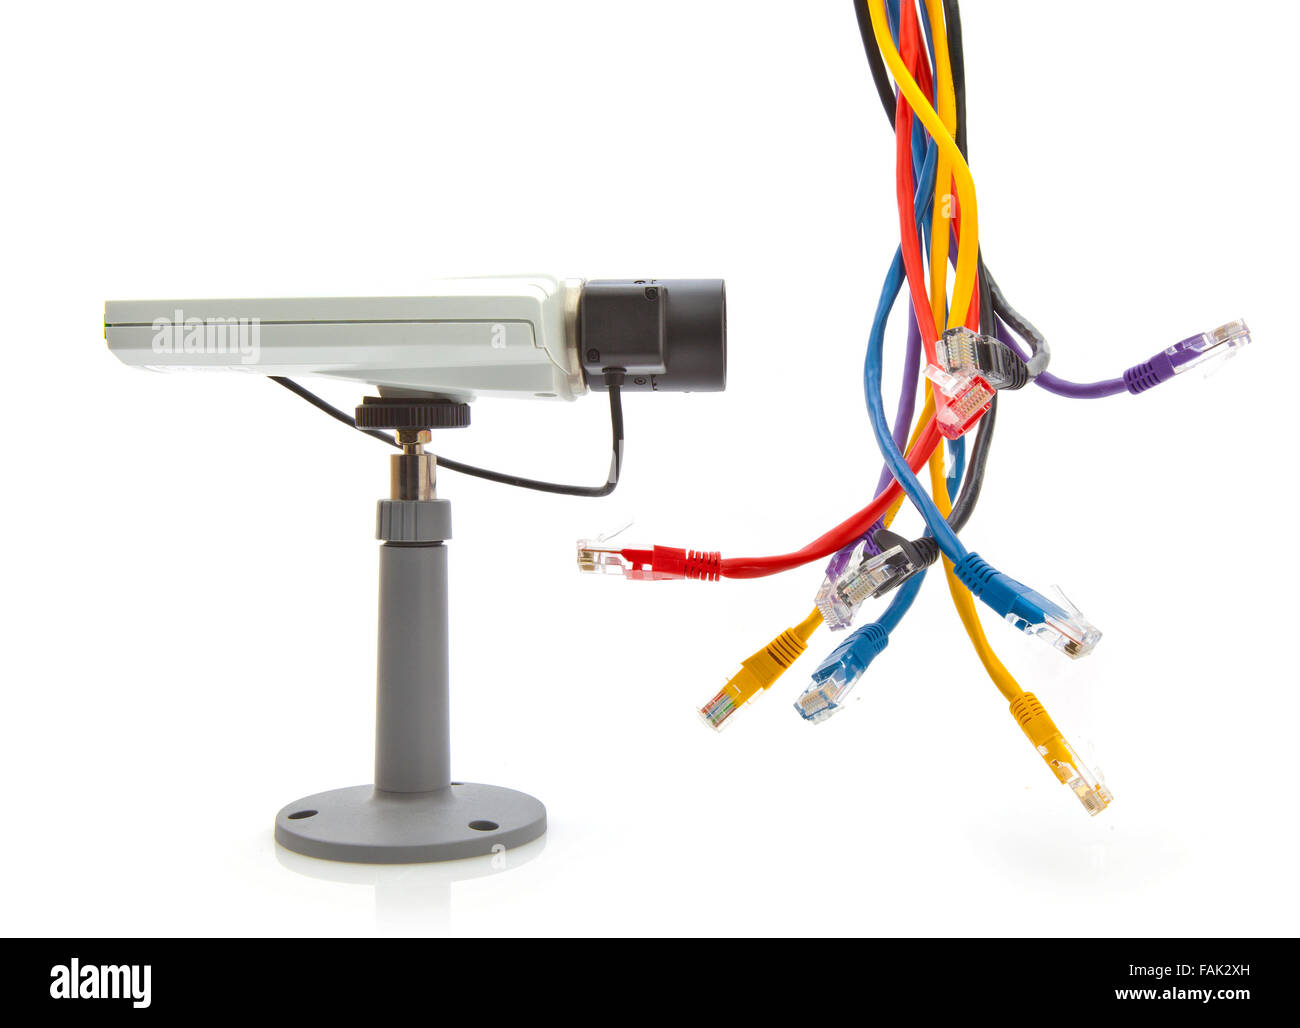 Network Security Camera with CAT 5 cables Stock Photo